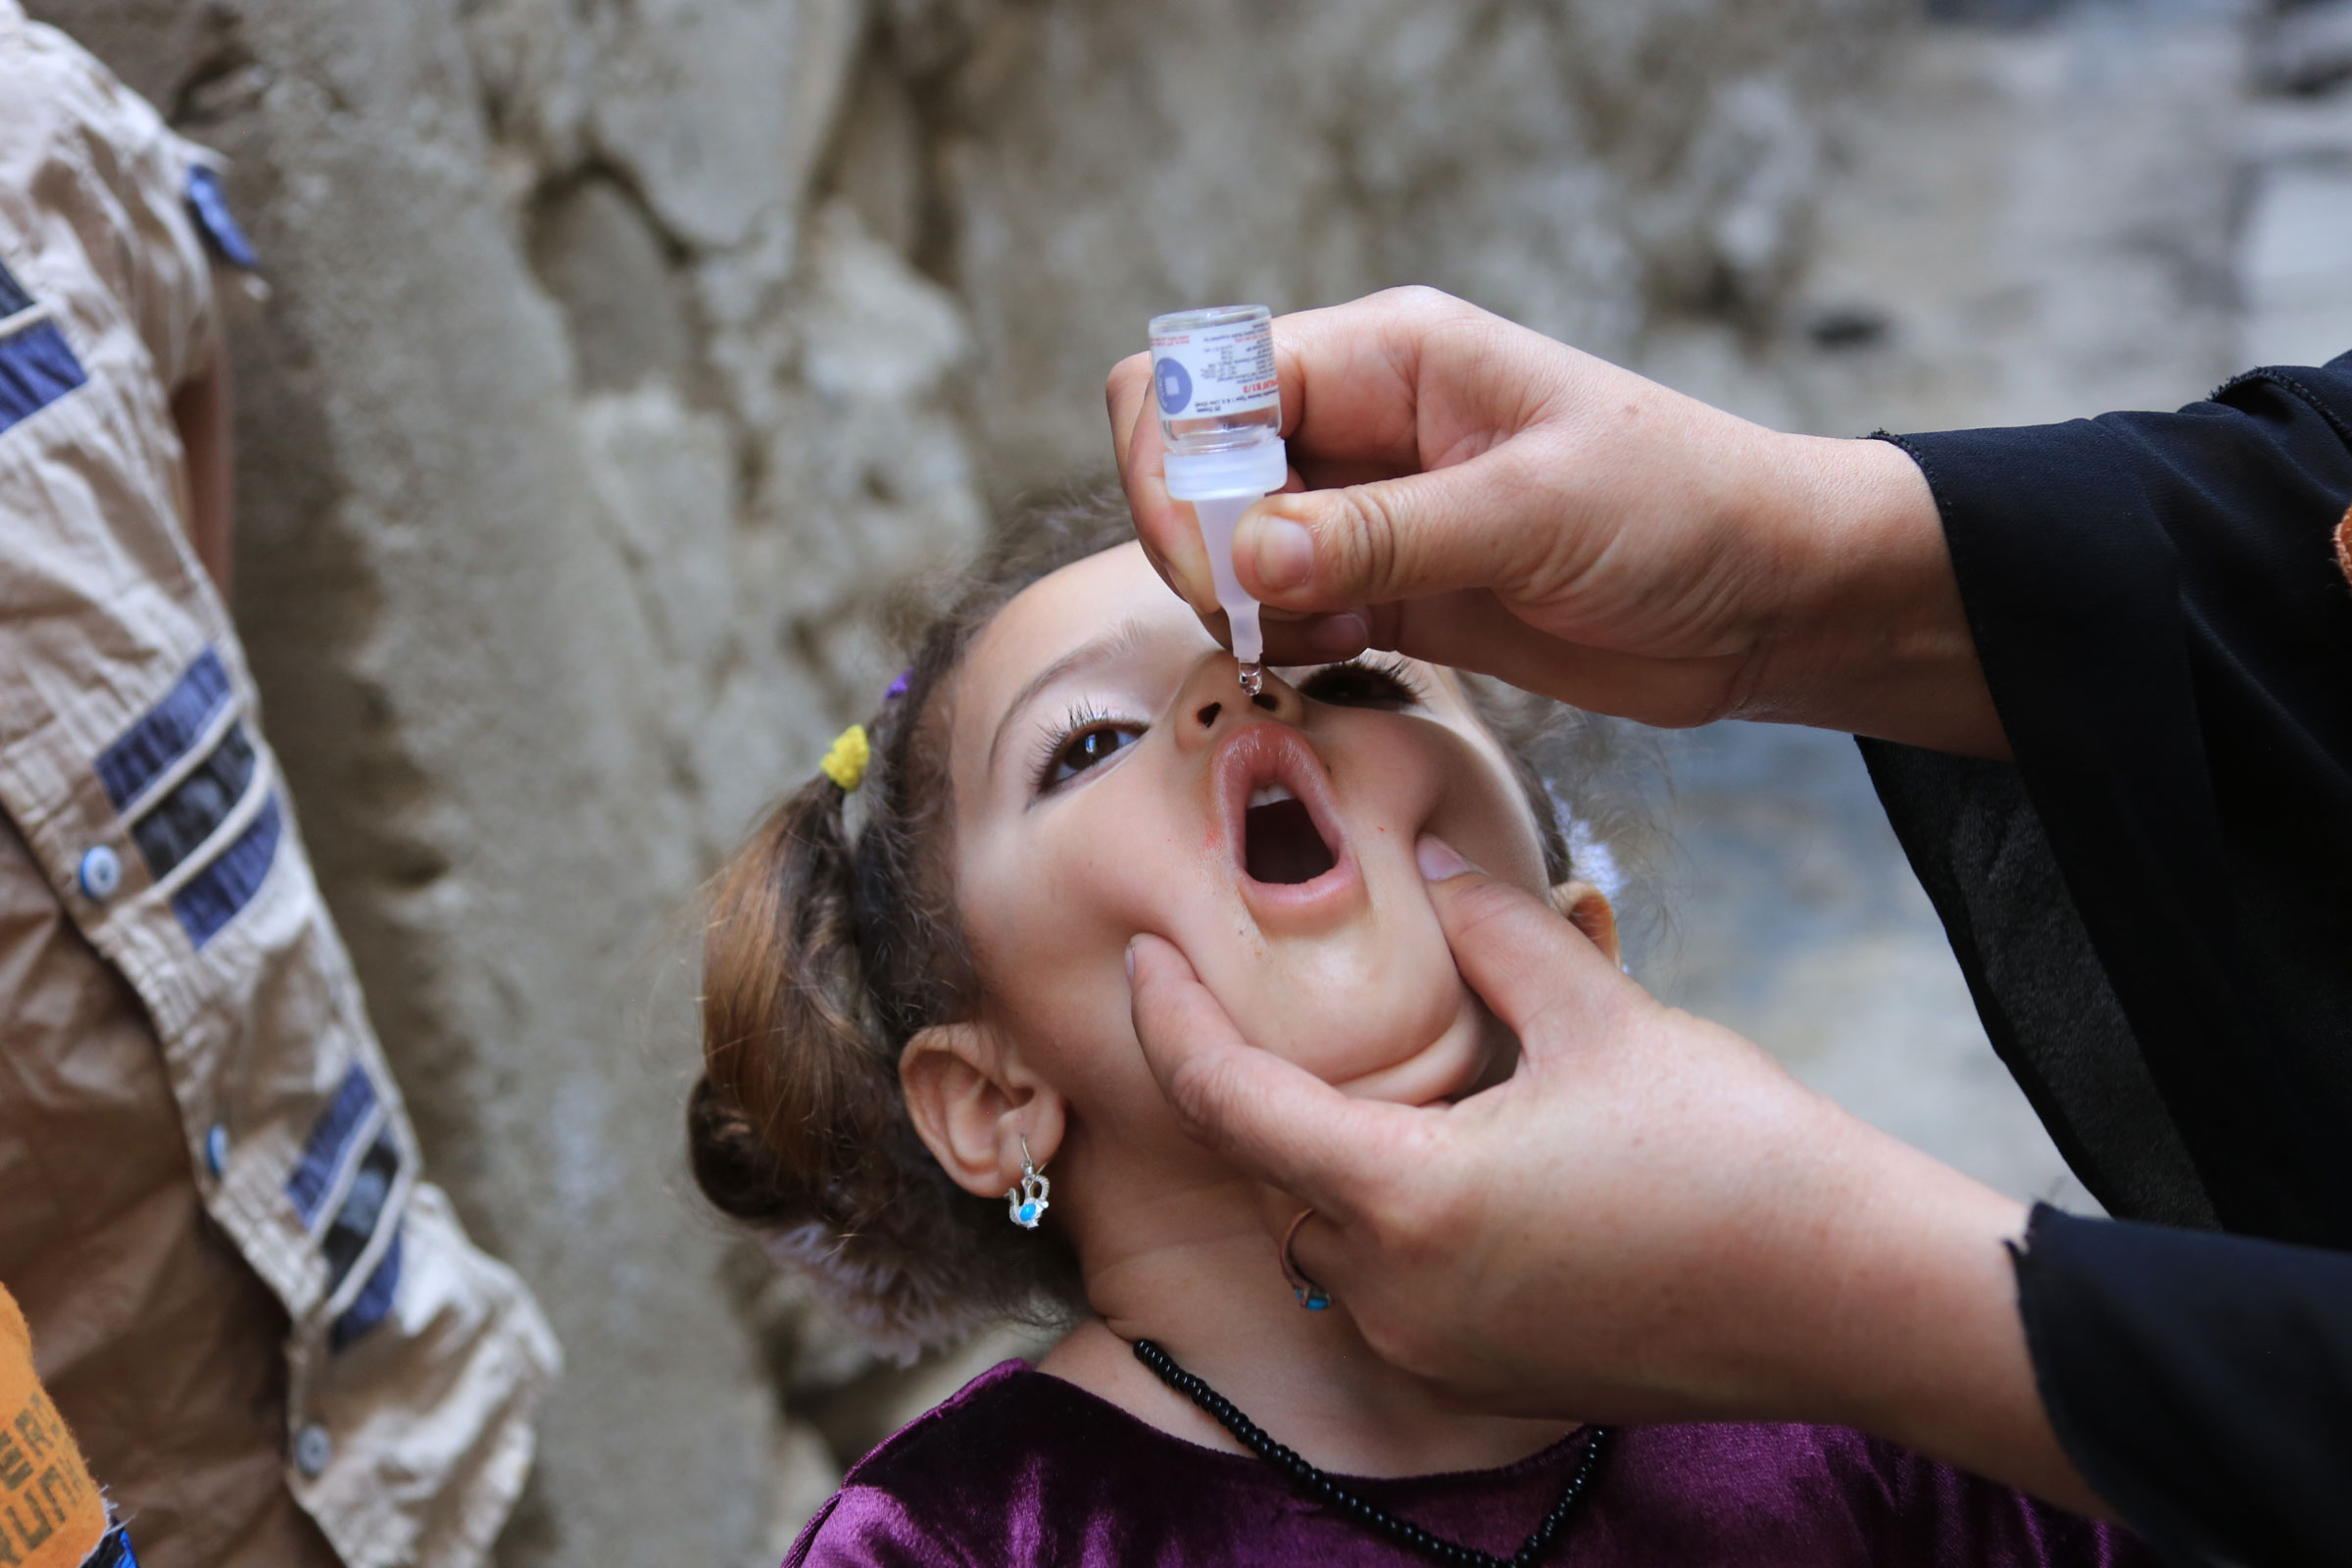 A health worker gives a dose of the polio vaccine to a child during a vaccination campaign against polio in Kabul, Afghanistan, on Sept. 19, 2022. (Saifurahman Safi—Xinhua/Getty Images)